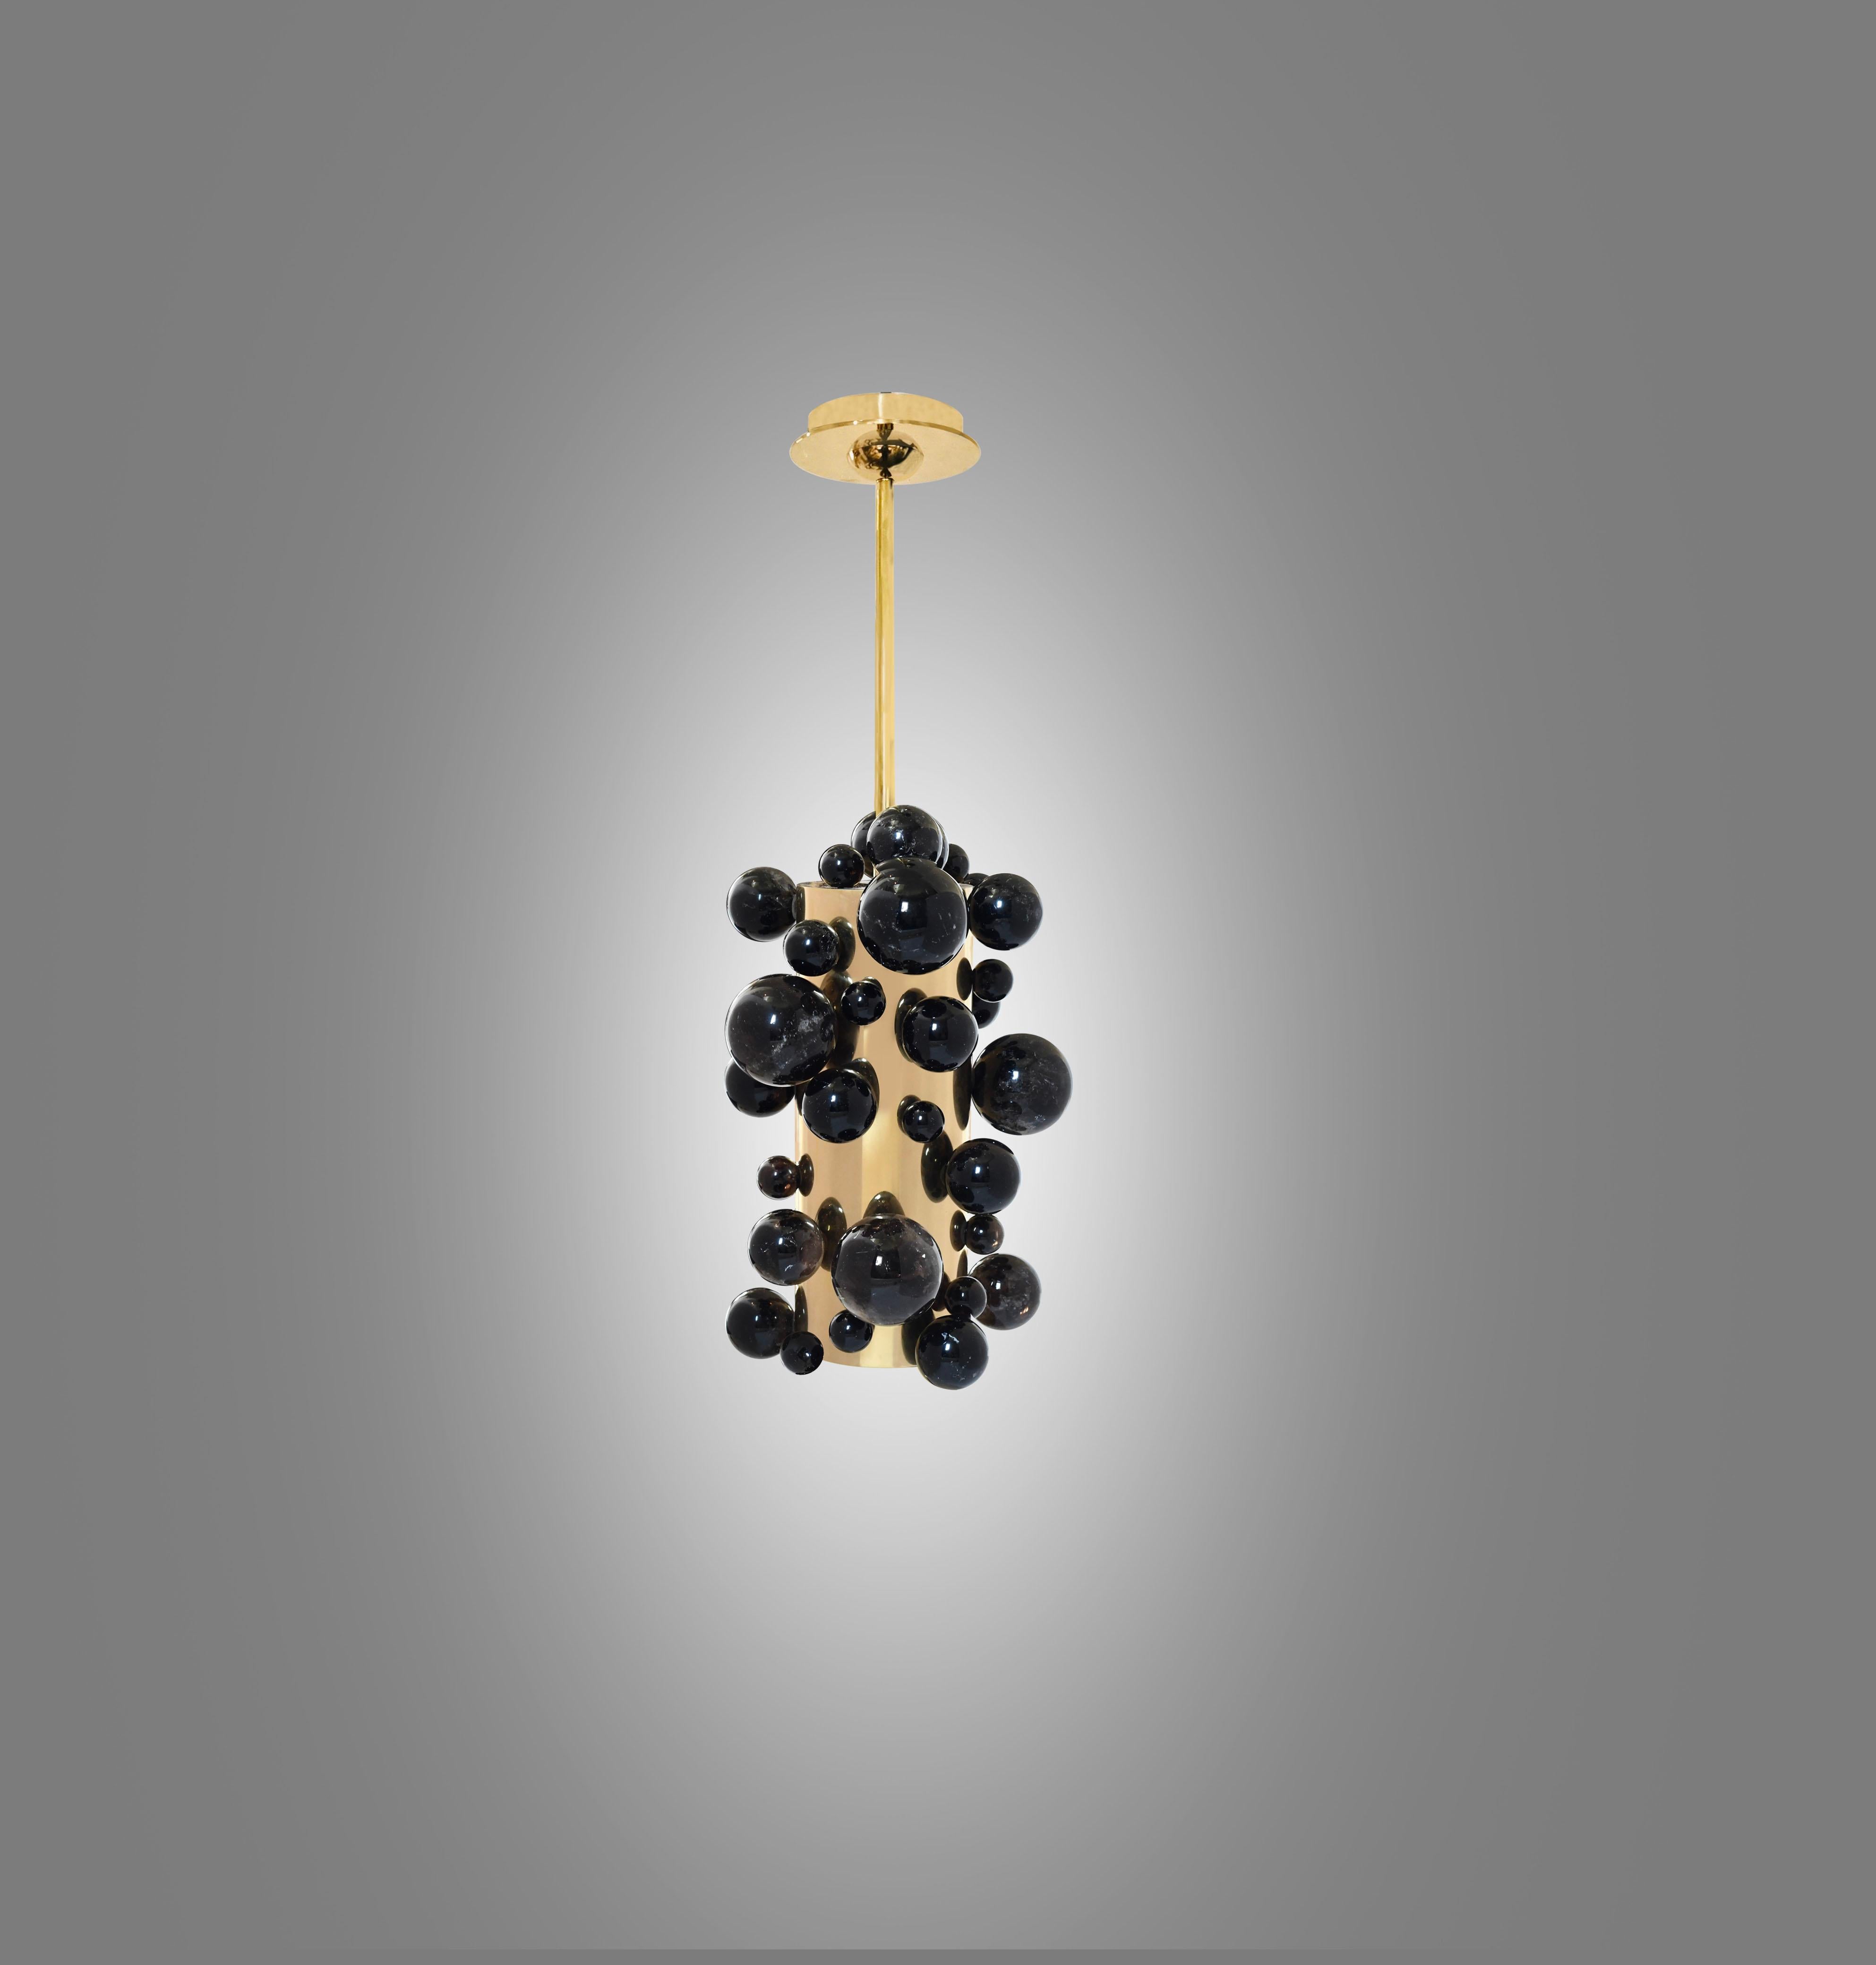 Smoky rock crystal bubble pendant light with polished brass finish. Created by Phoenix Gallery, NYC.
Two sockets installed. Use LED warm light bulbs. 50w each. 100 w total.
Dimension of the pendant: 8